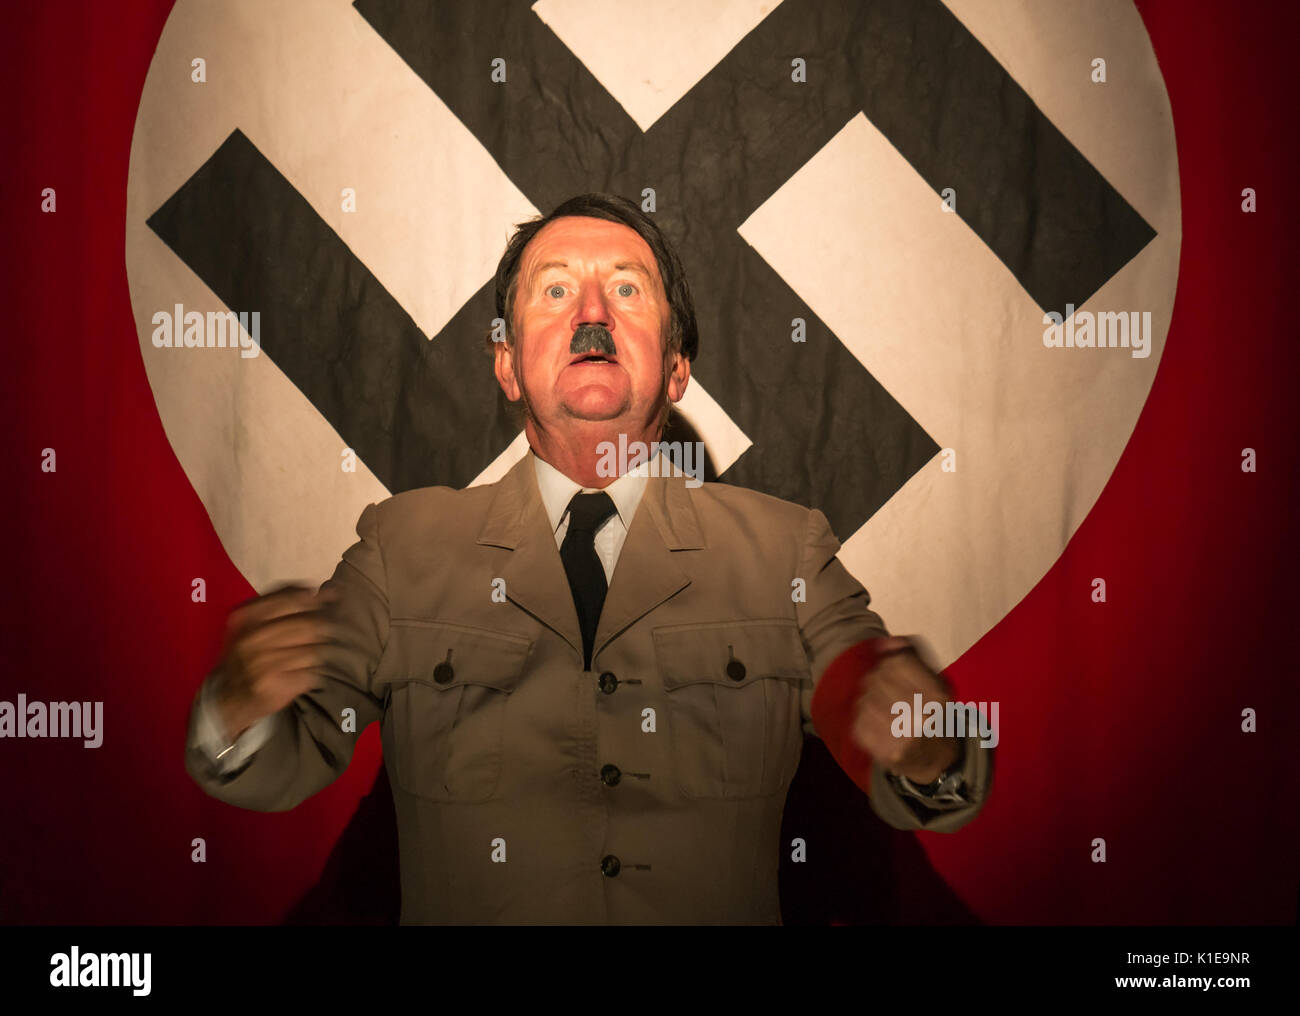 Pleasance Courtyard, Edinburgh, Scotland, United Kingdom, 26th August 2017. Pip Utton, versatile actor and Fringe Festival regular, in one man solo role of historical figure Adolf Hitler at Edinburgh Fringe Festival, Pleasance Courtyard, standing in front of a large banner with a swastika Stock Photo